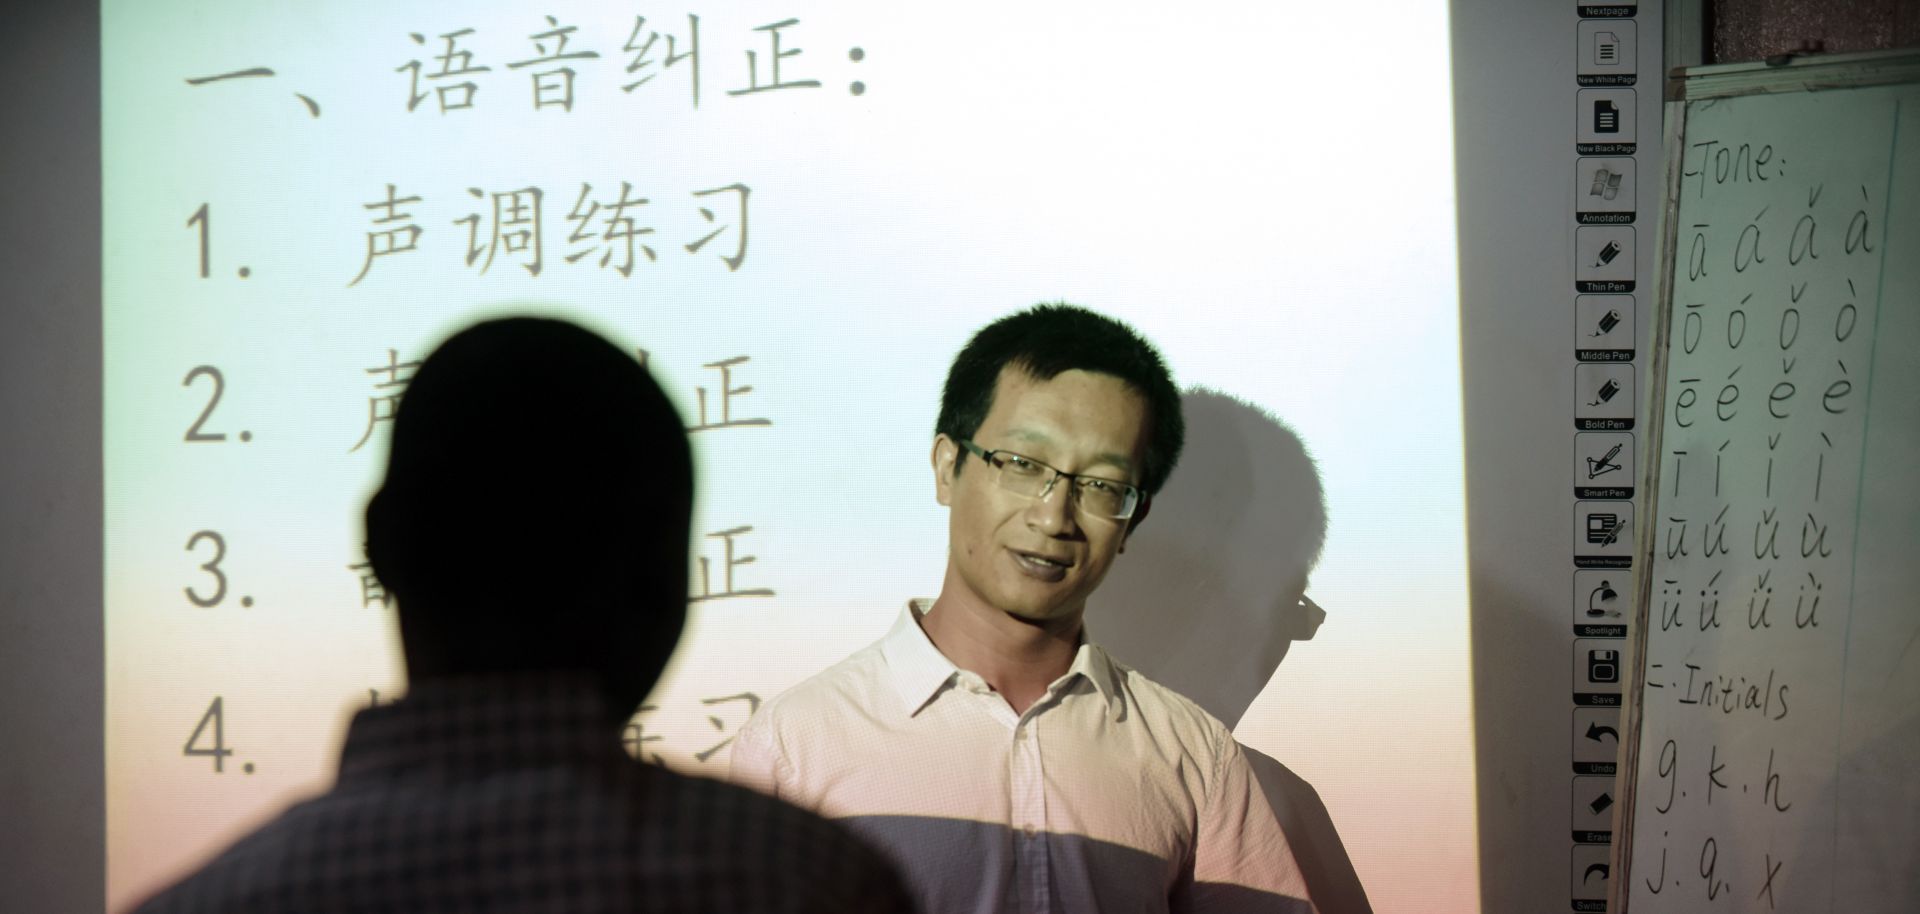 An instructor gives a lesson in Chinese language at a Confucius Institute in Lagos, Nigeria, in April 2016.